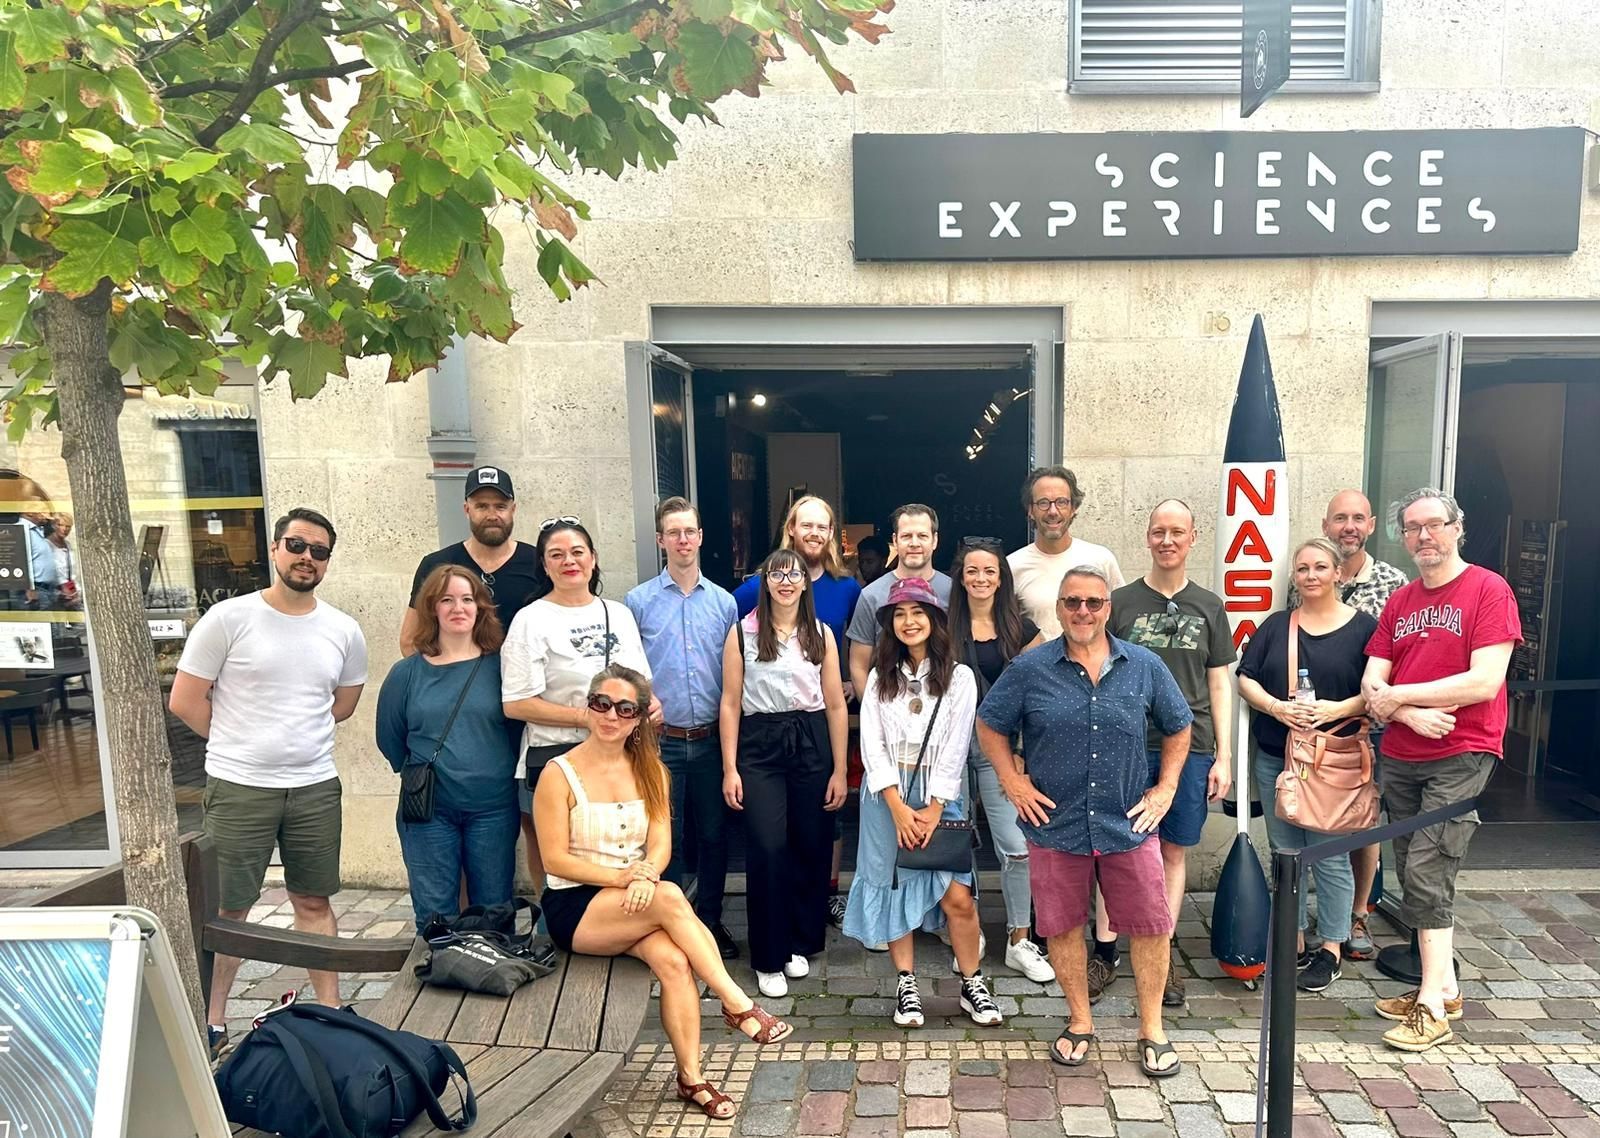 The Guide-ID team posing in front of Science Experiences in Paris